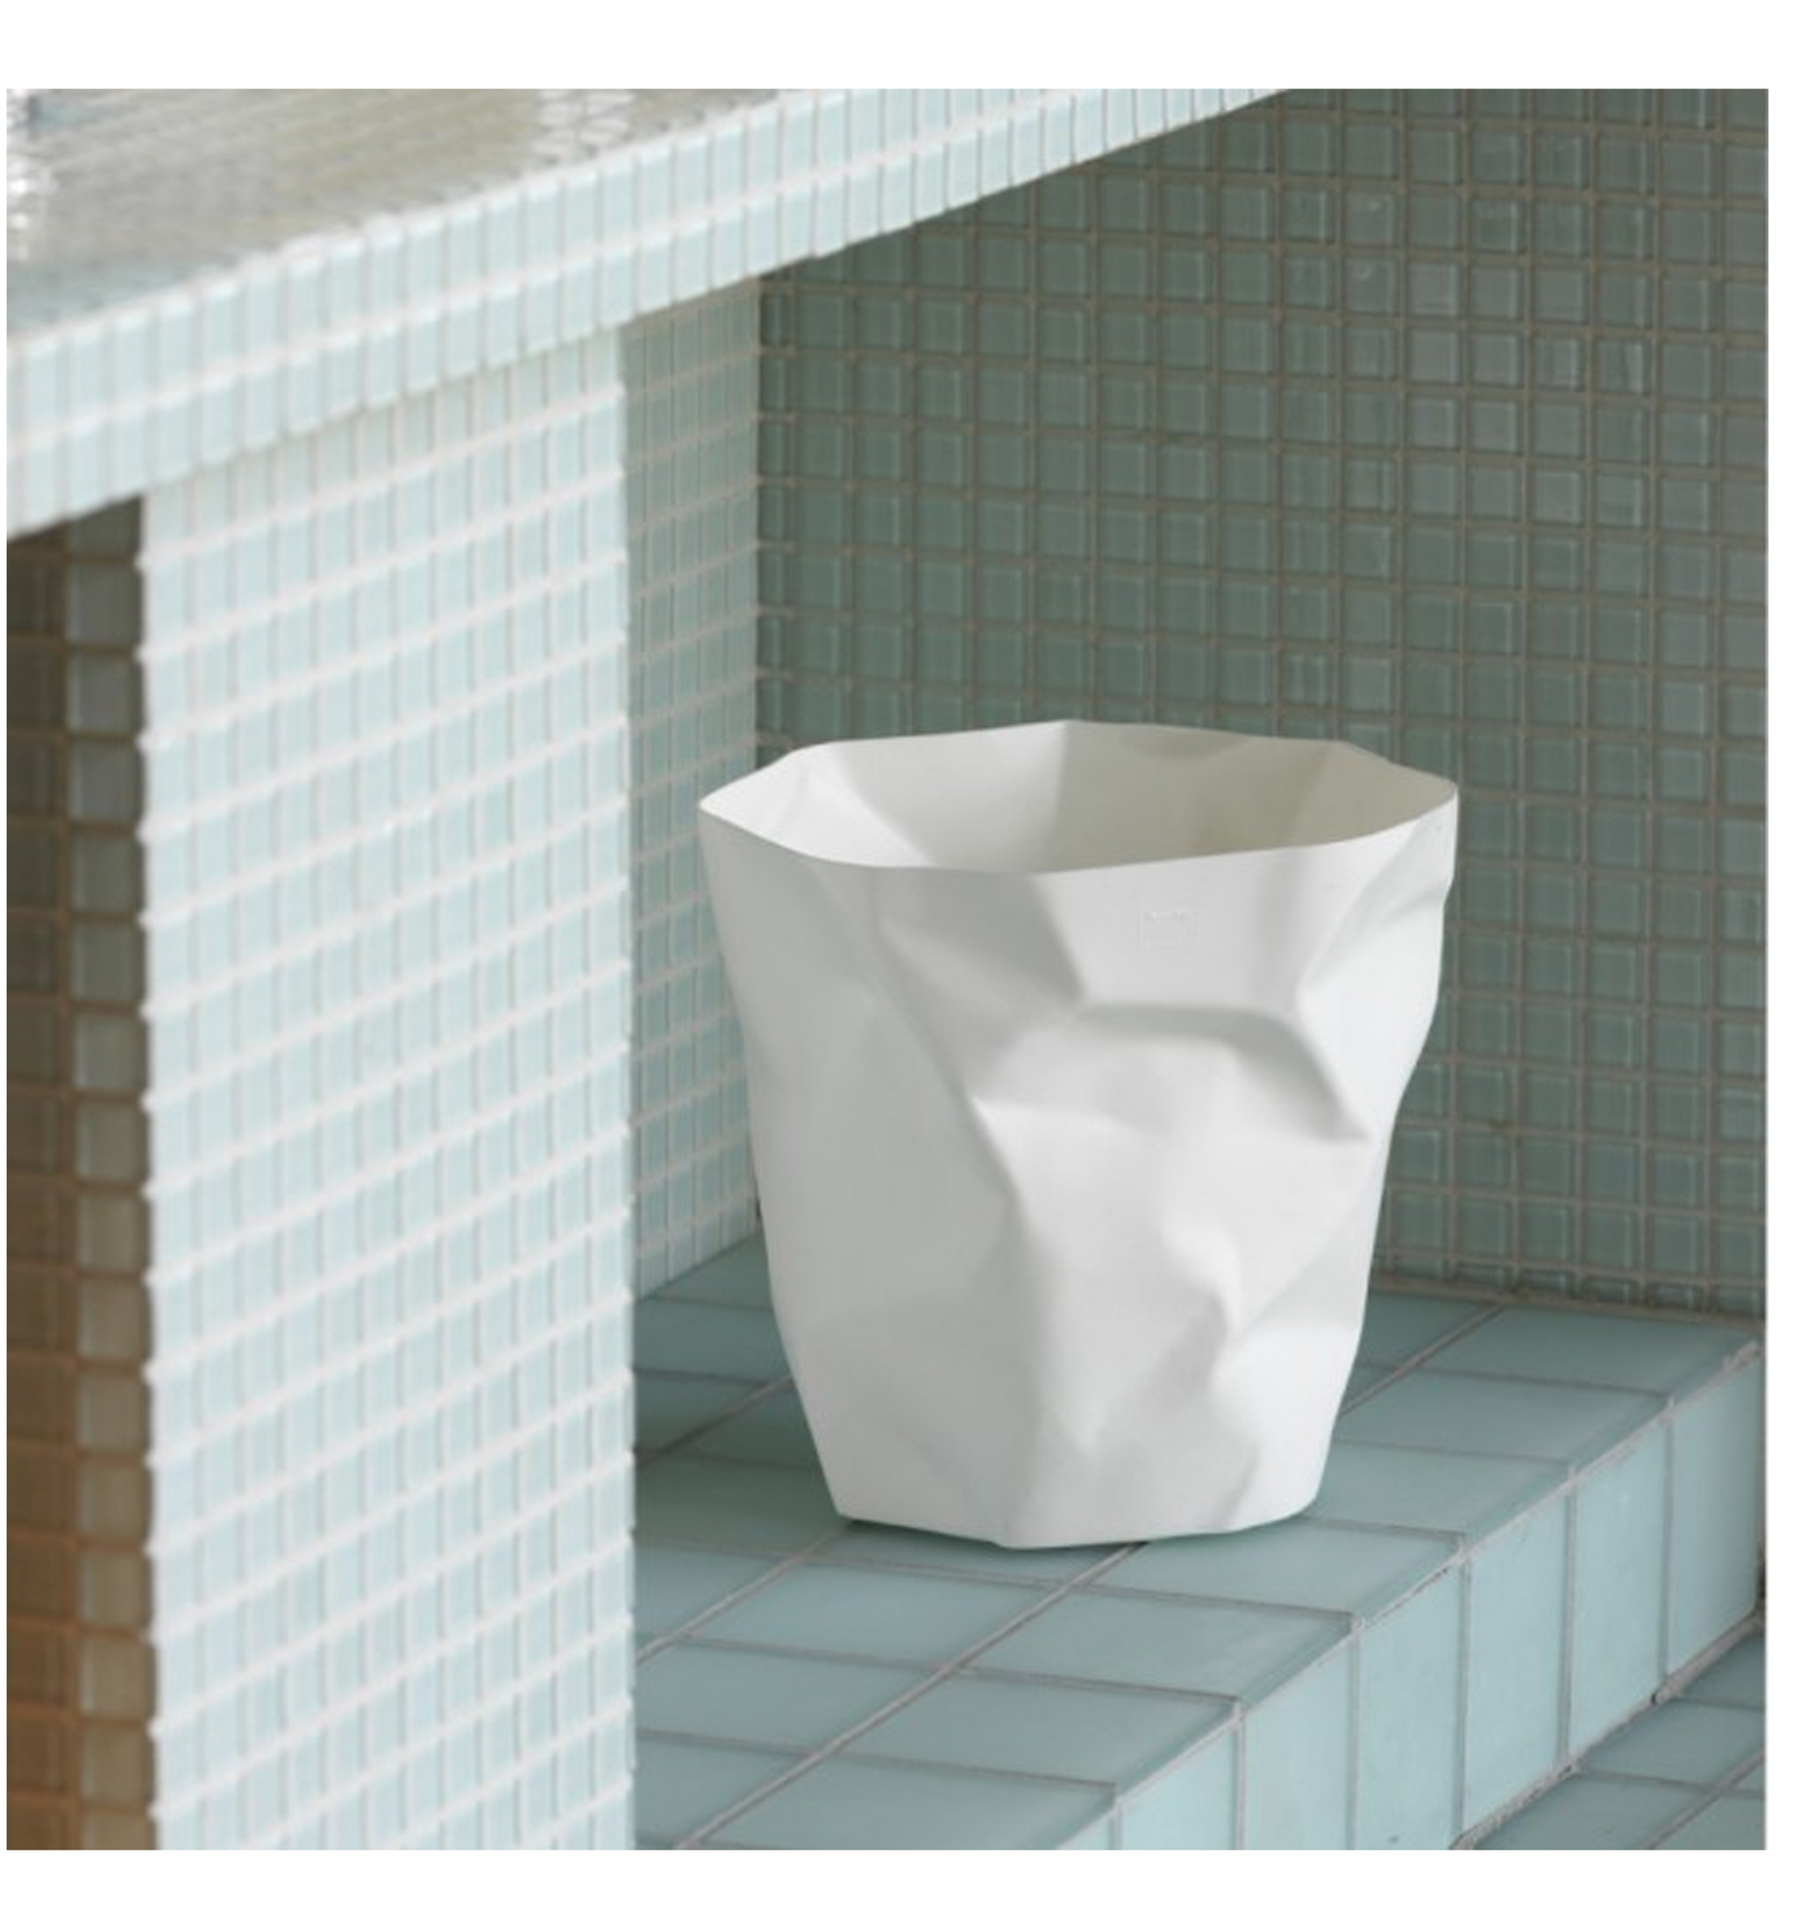 AMEICO - Official US Distributor of Essey - Wipy Cube Tissue Holder